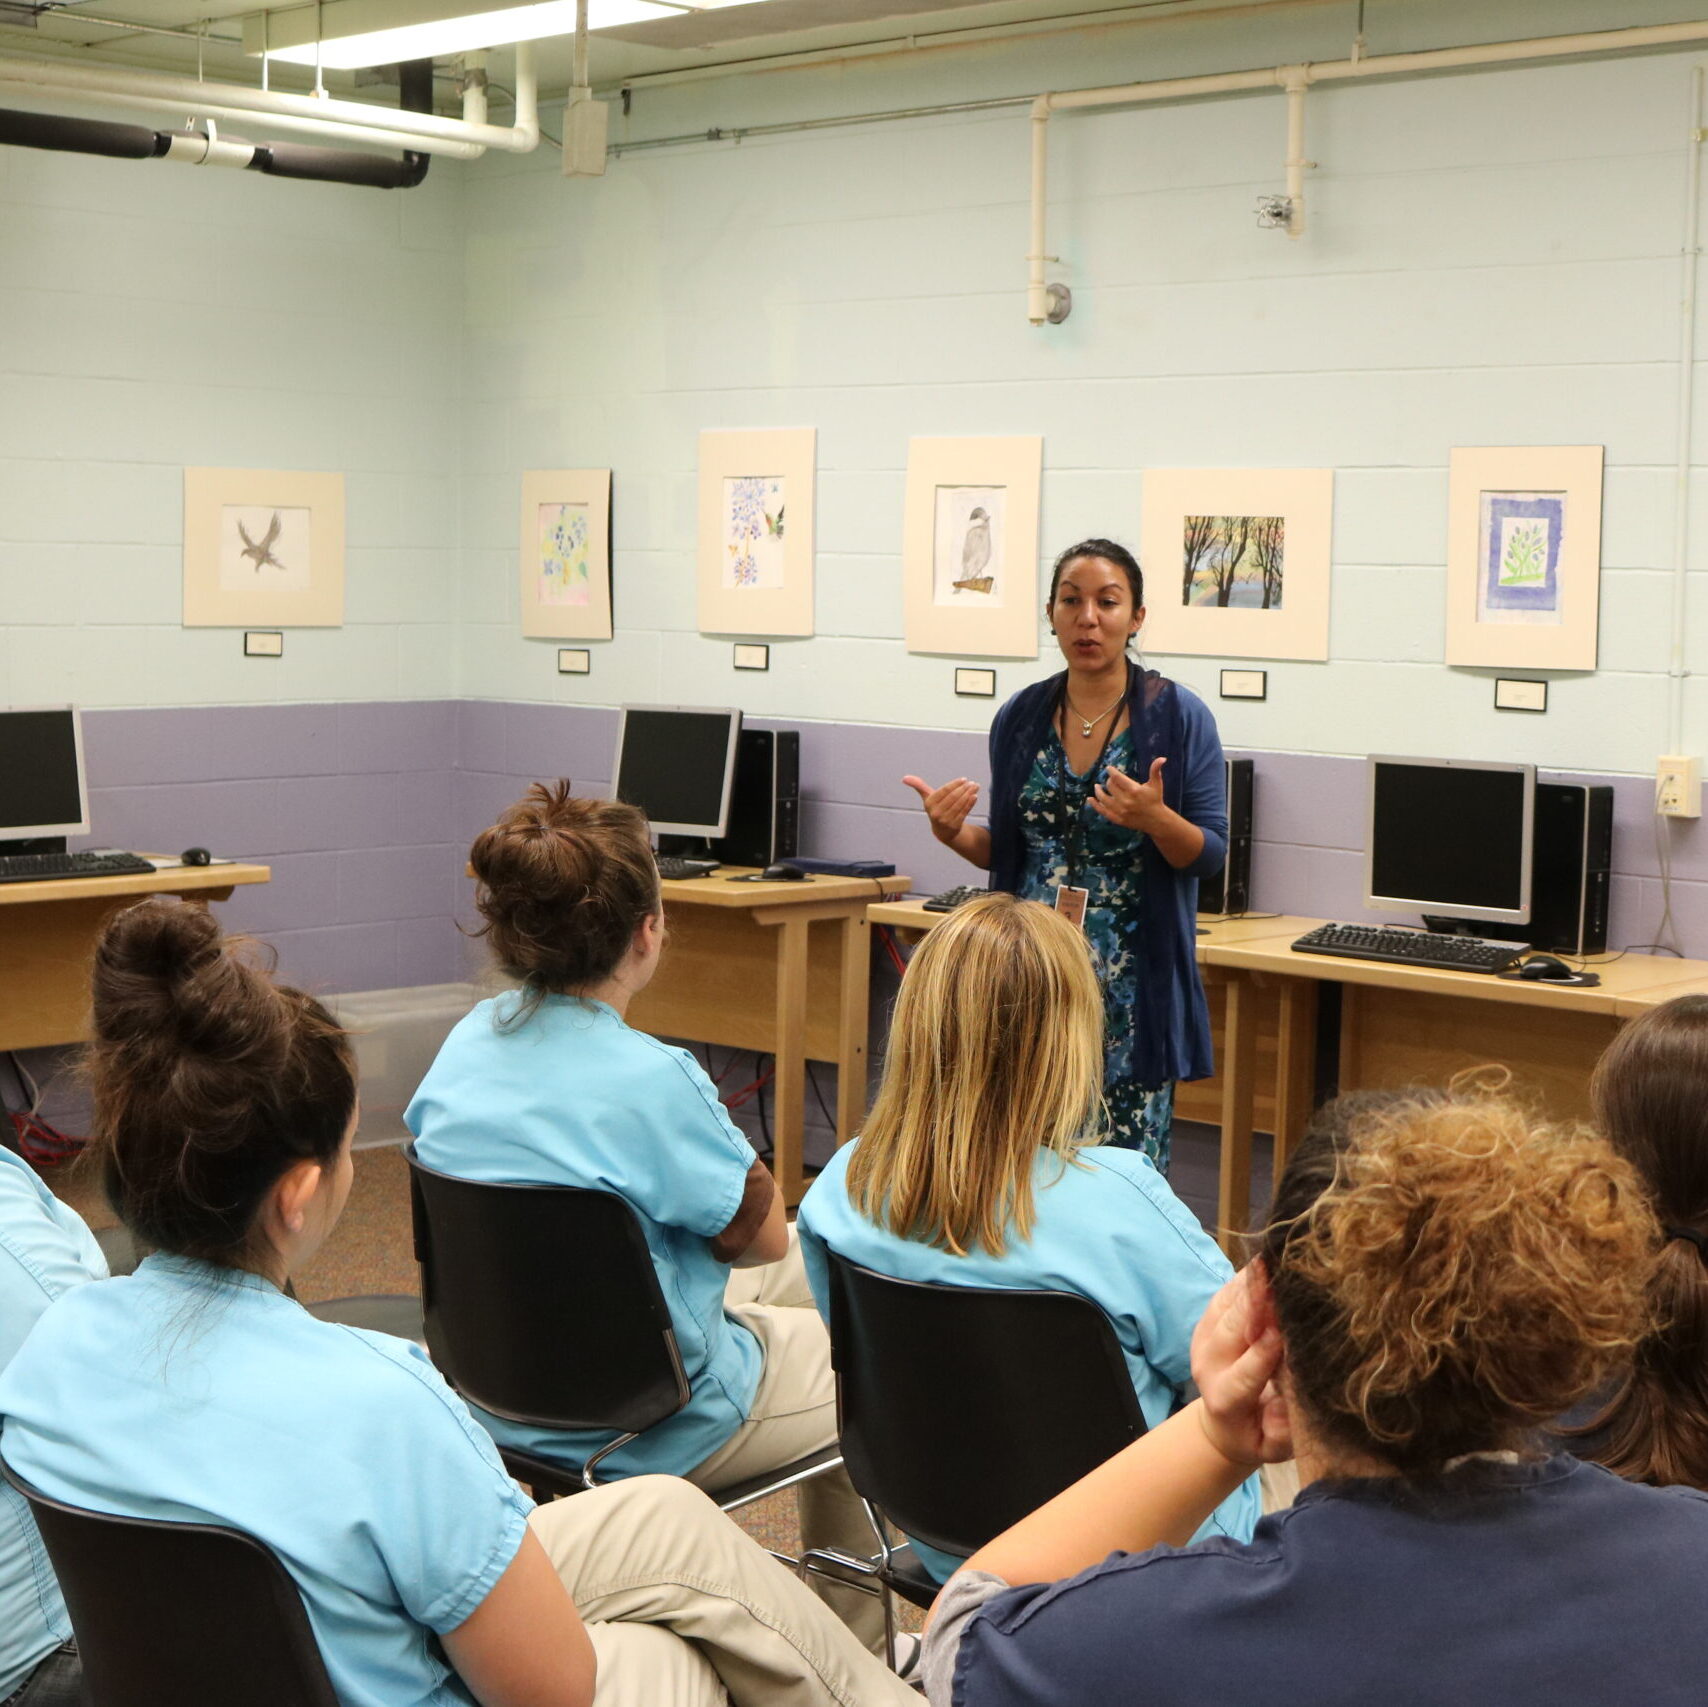 Vermont legislator Kesha Ram speaks to a group of incarcerated women at Enrichment Night in the Chittenden Regional Correctional Facility. Enrichment Night is one of the services VWW offers to justice-involved women.